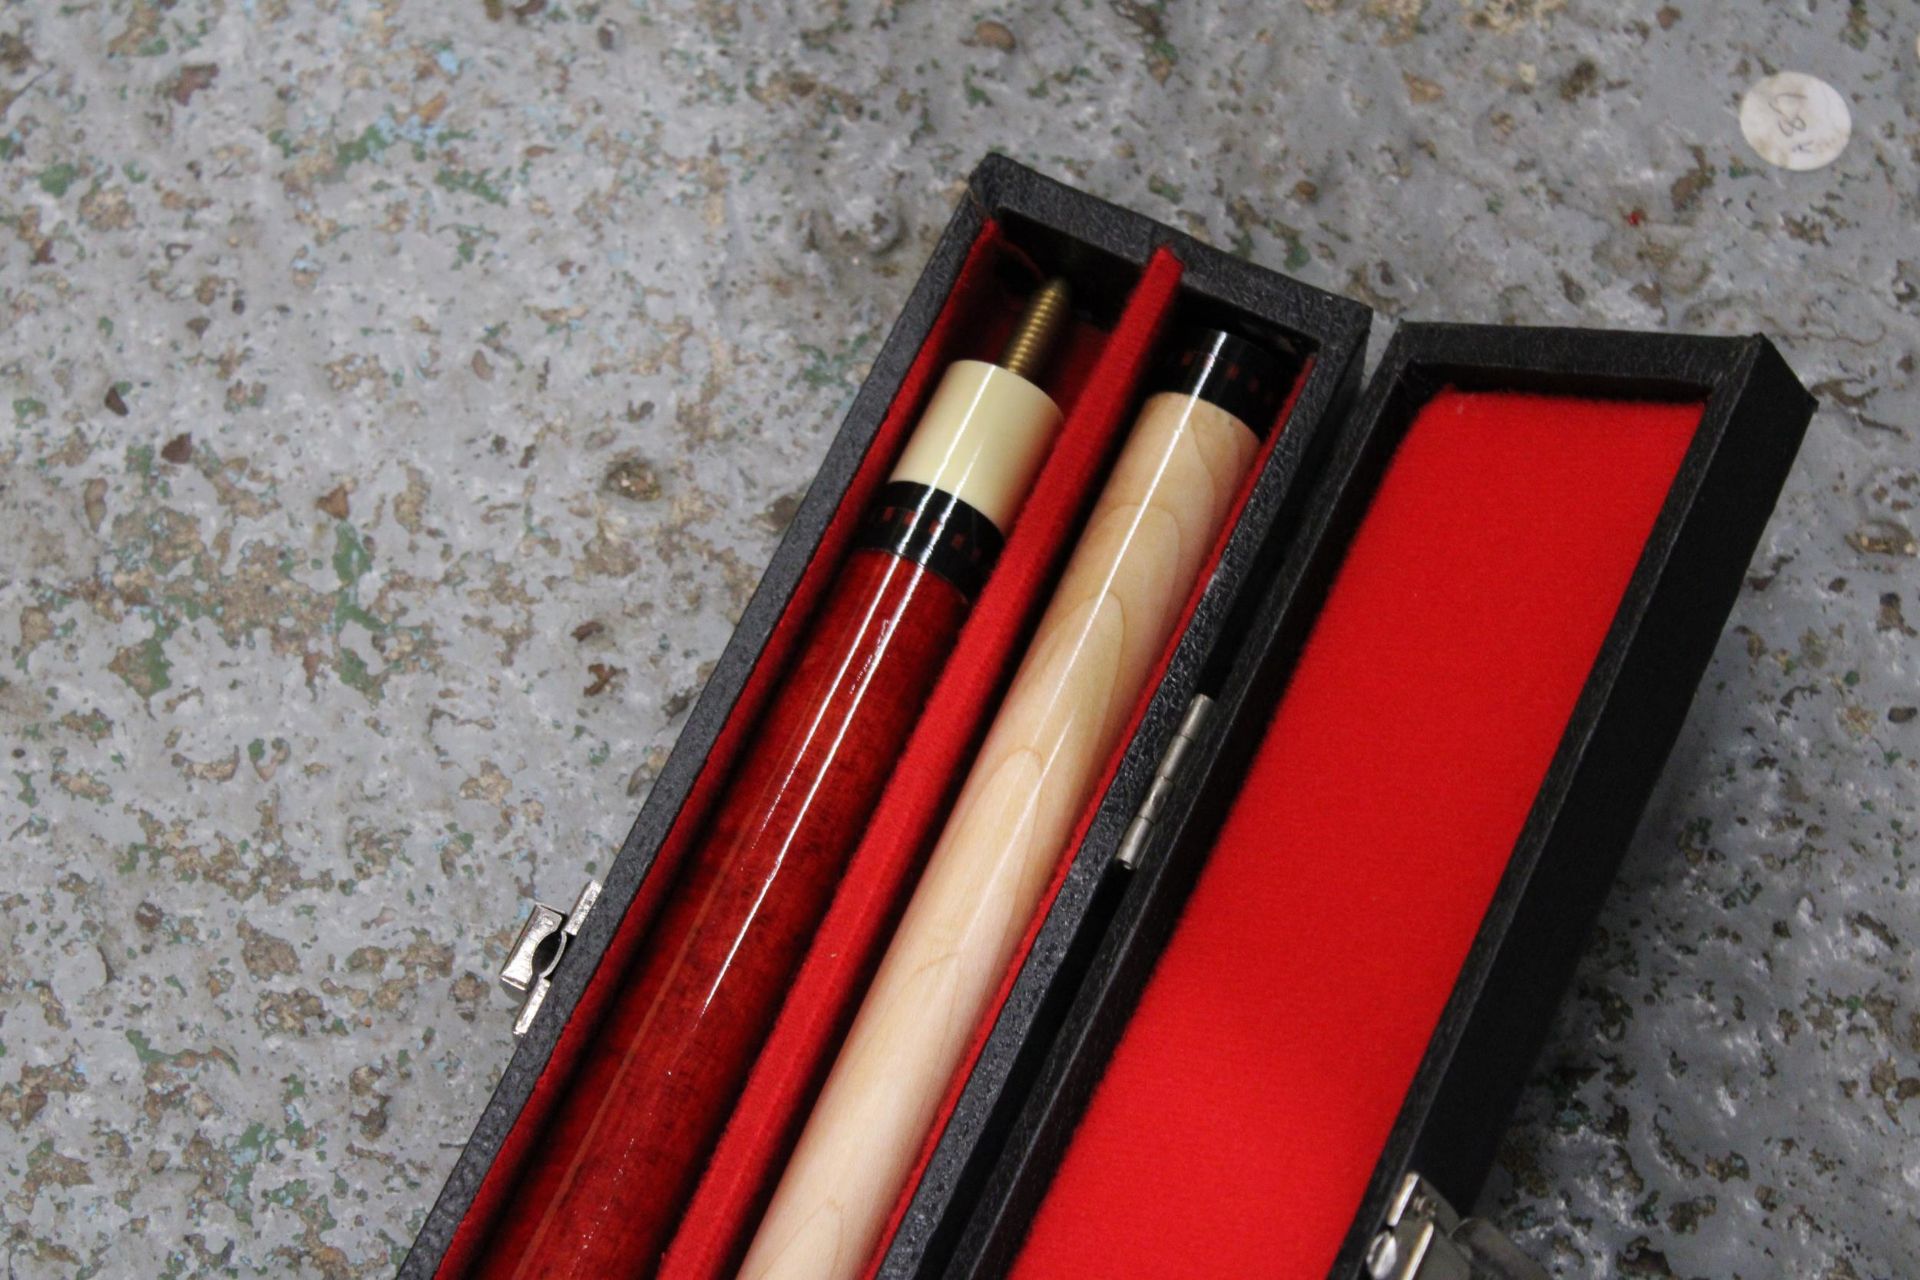 A RILEY SNOOKER/POOL CUE IN A HARD CASE - Image 3 of 4